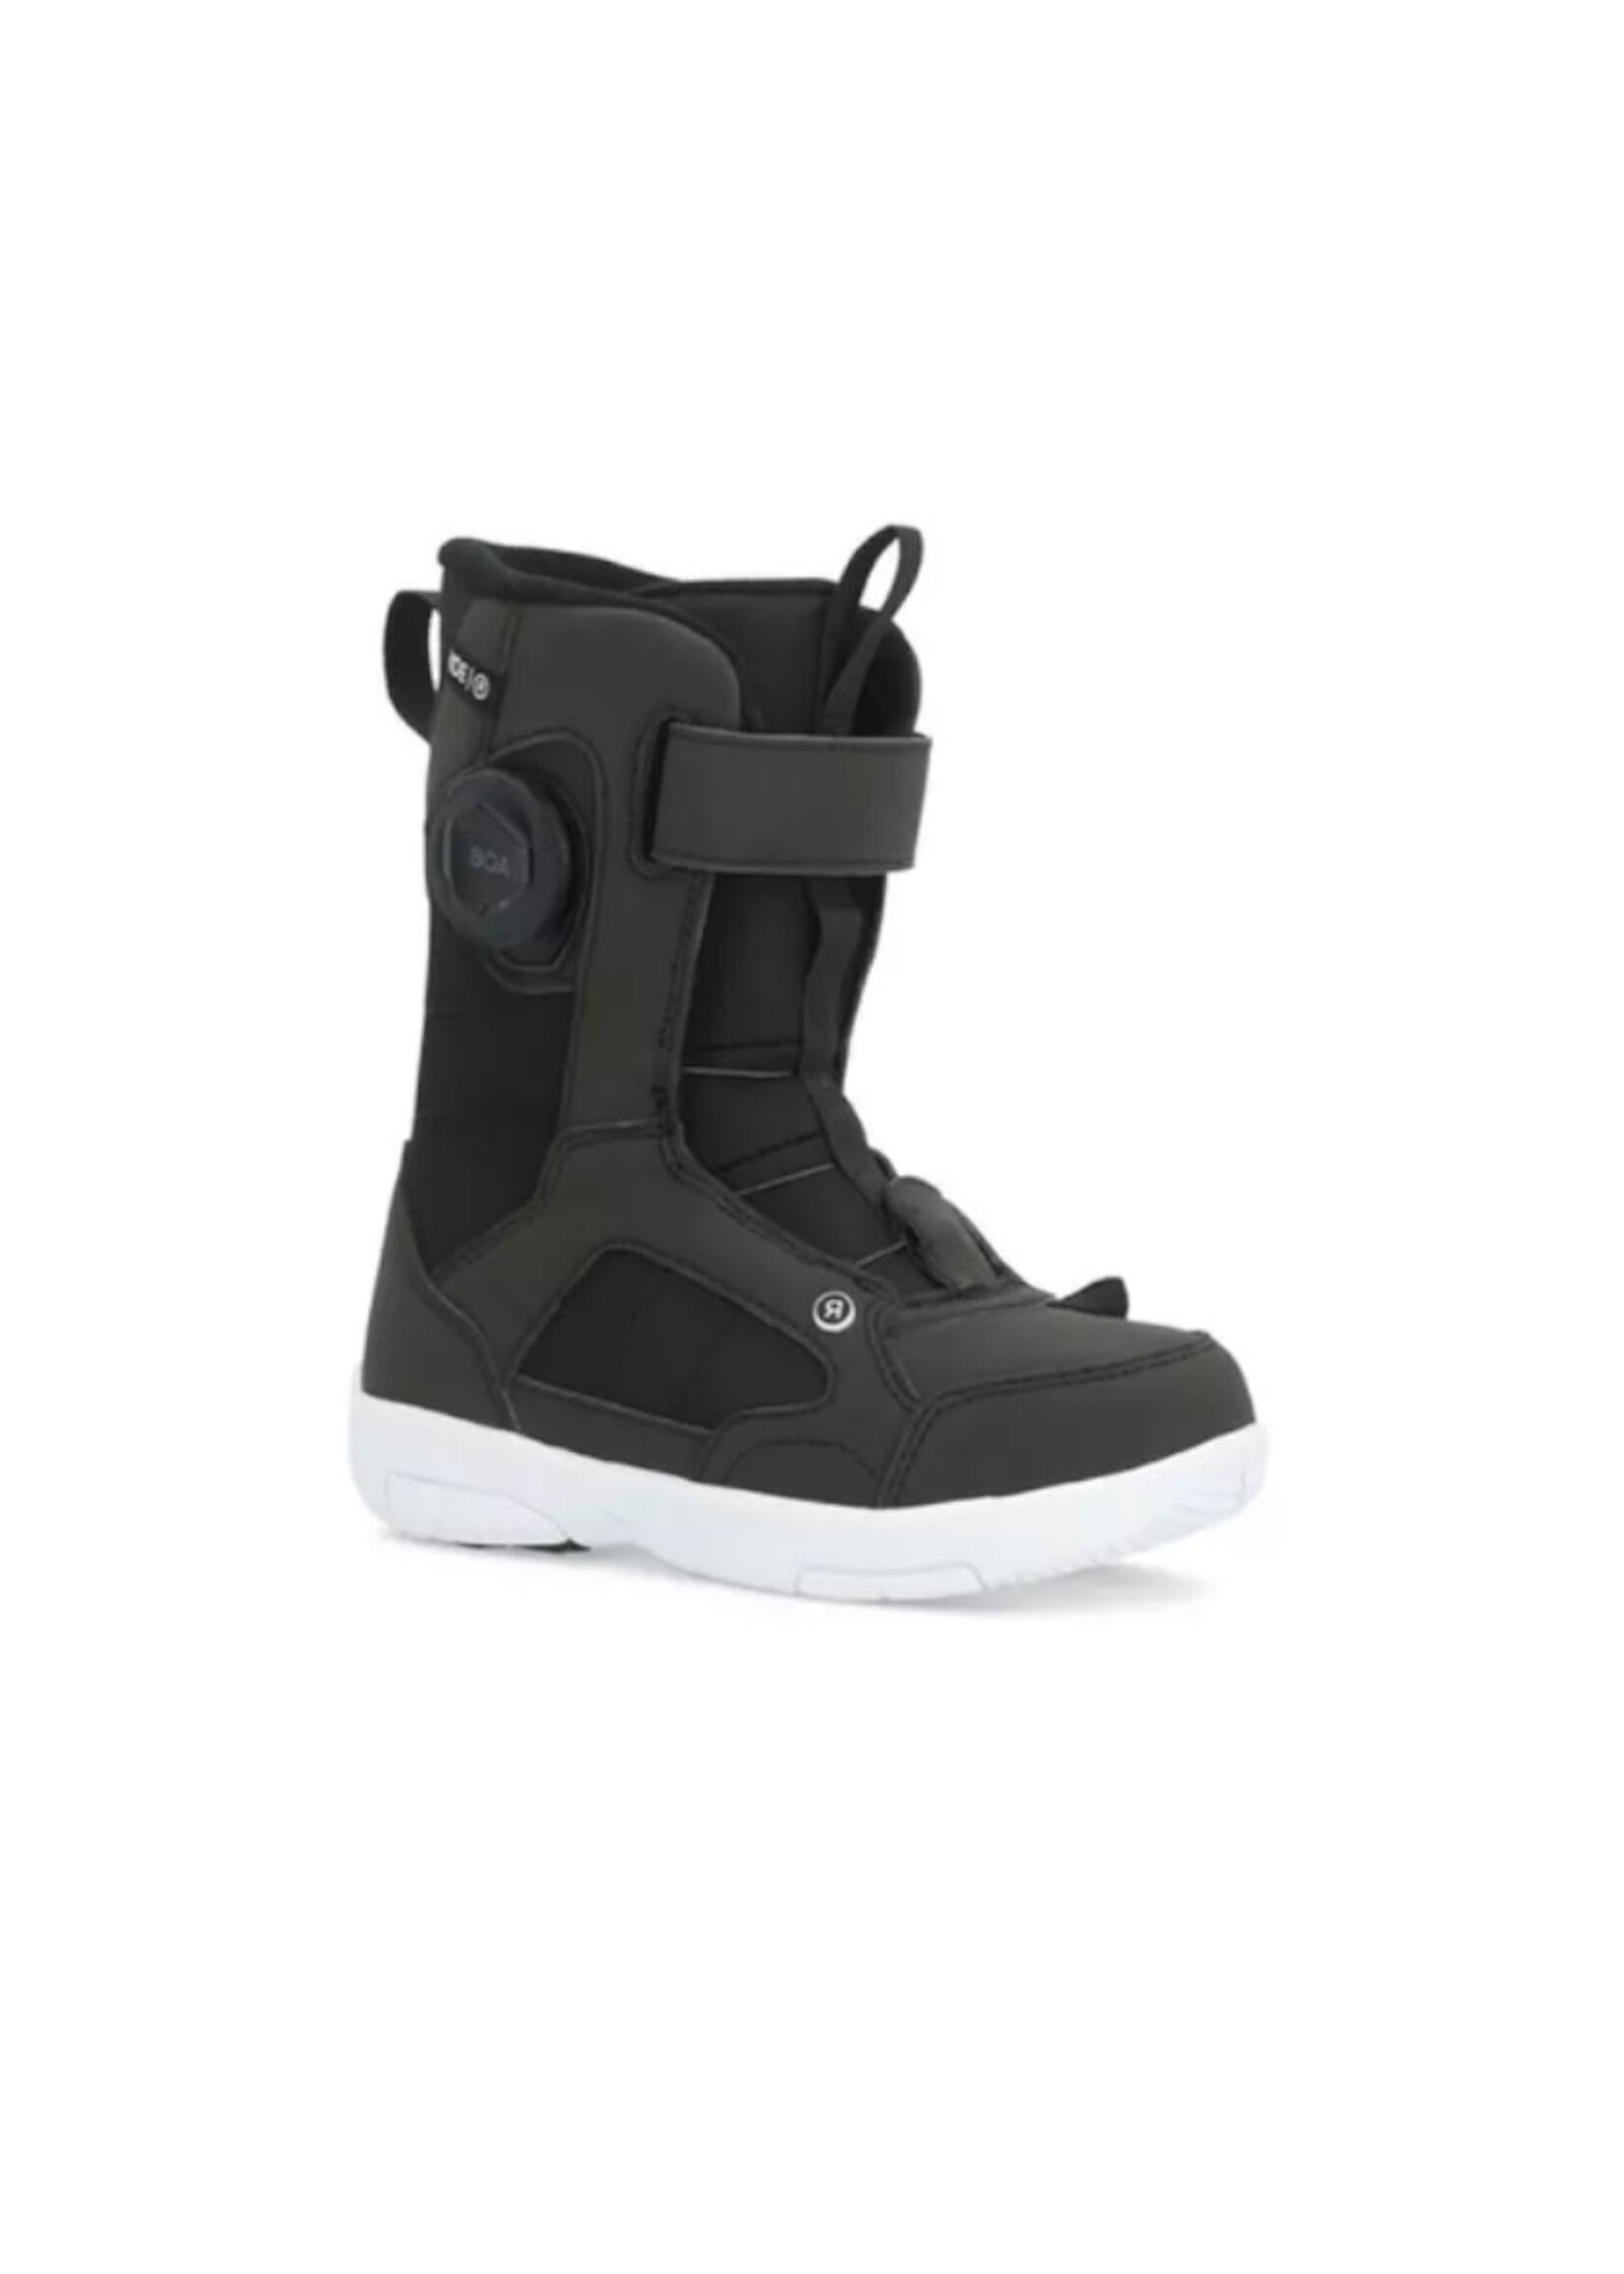 Ride Snowboards NORRIS Boot